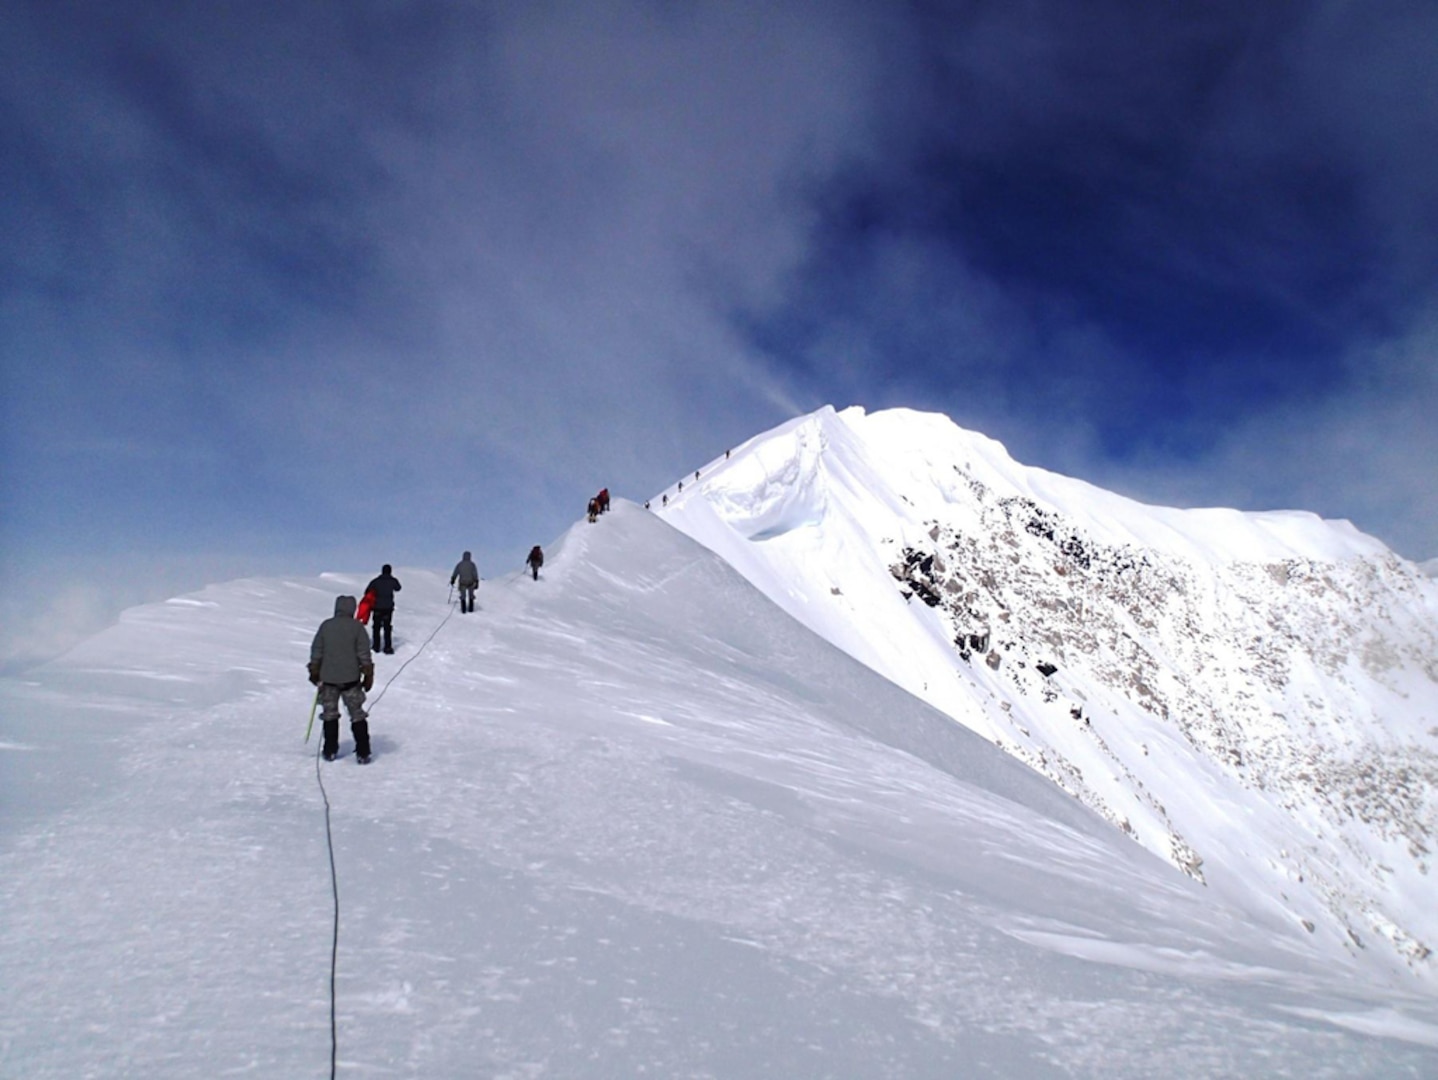 JOINT BASE ELMENDORF-RICHARDSON, Alaska (June 24, 2014) - The 4th Infantry Brigade Combat Team (Airborne), 25th Infantry Division, climb team, sponsored by U.S. Army Alaska, makes its way across Summit Ridge on Mount McKinley, June 15, 2014, at the Denali National Park and Preserve, Alaska. The team was there to demonstrate their arctic abilities and validate both their training and their equipment.  